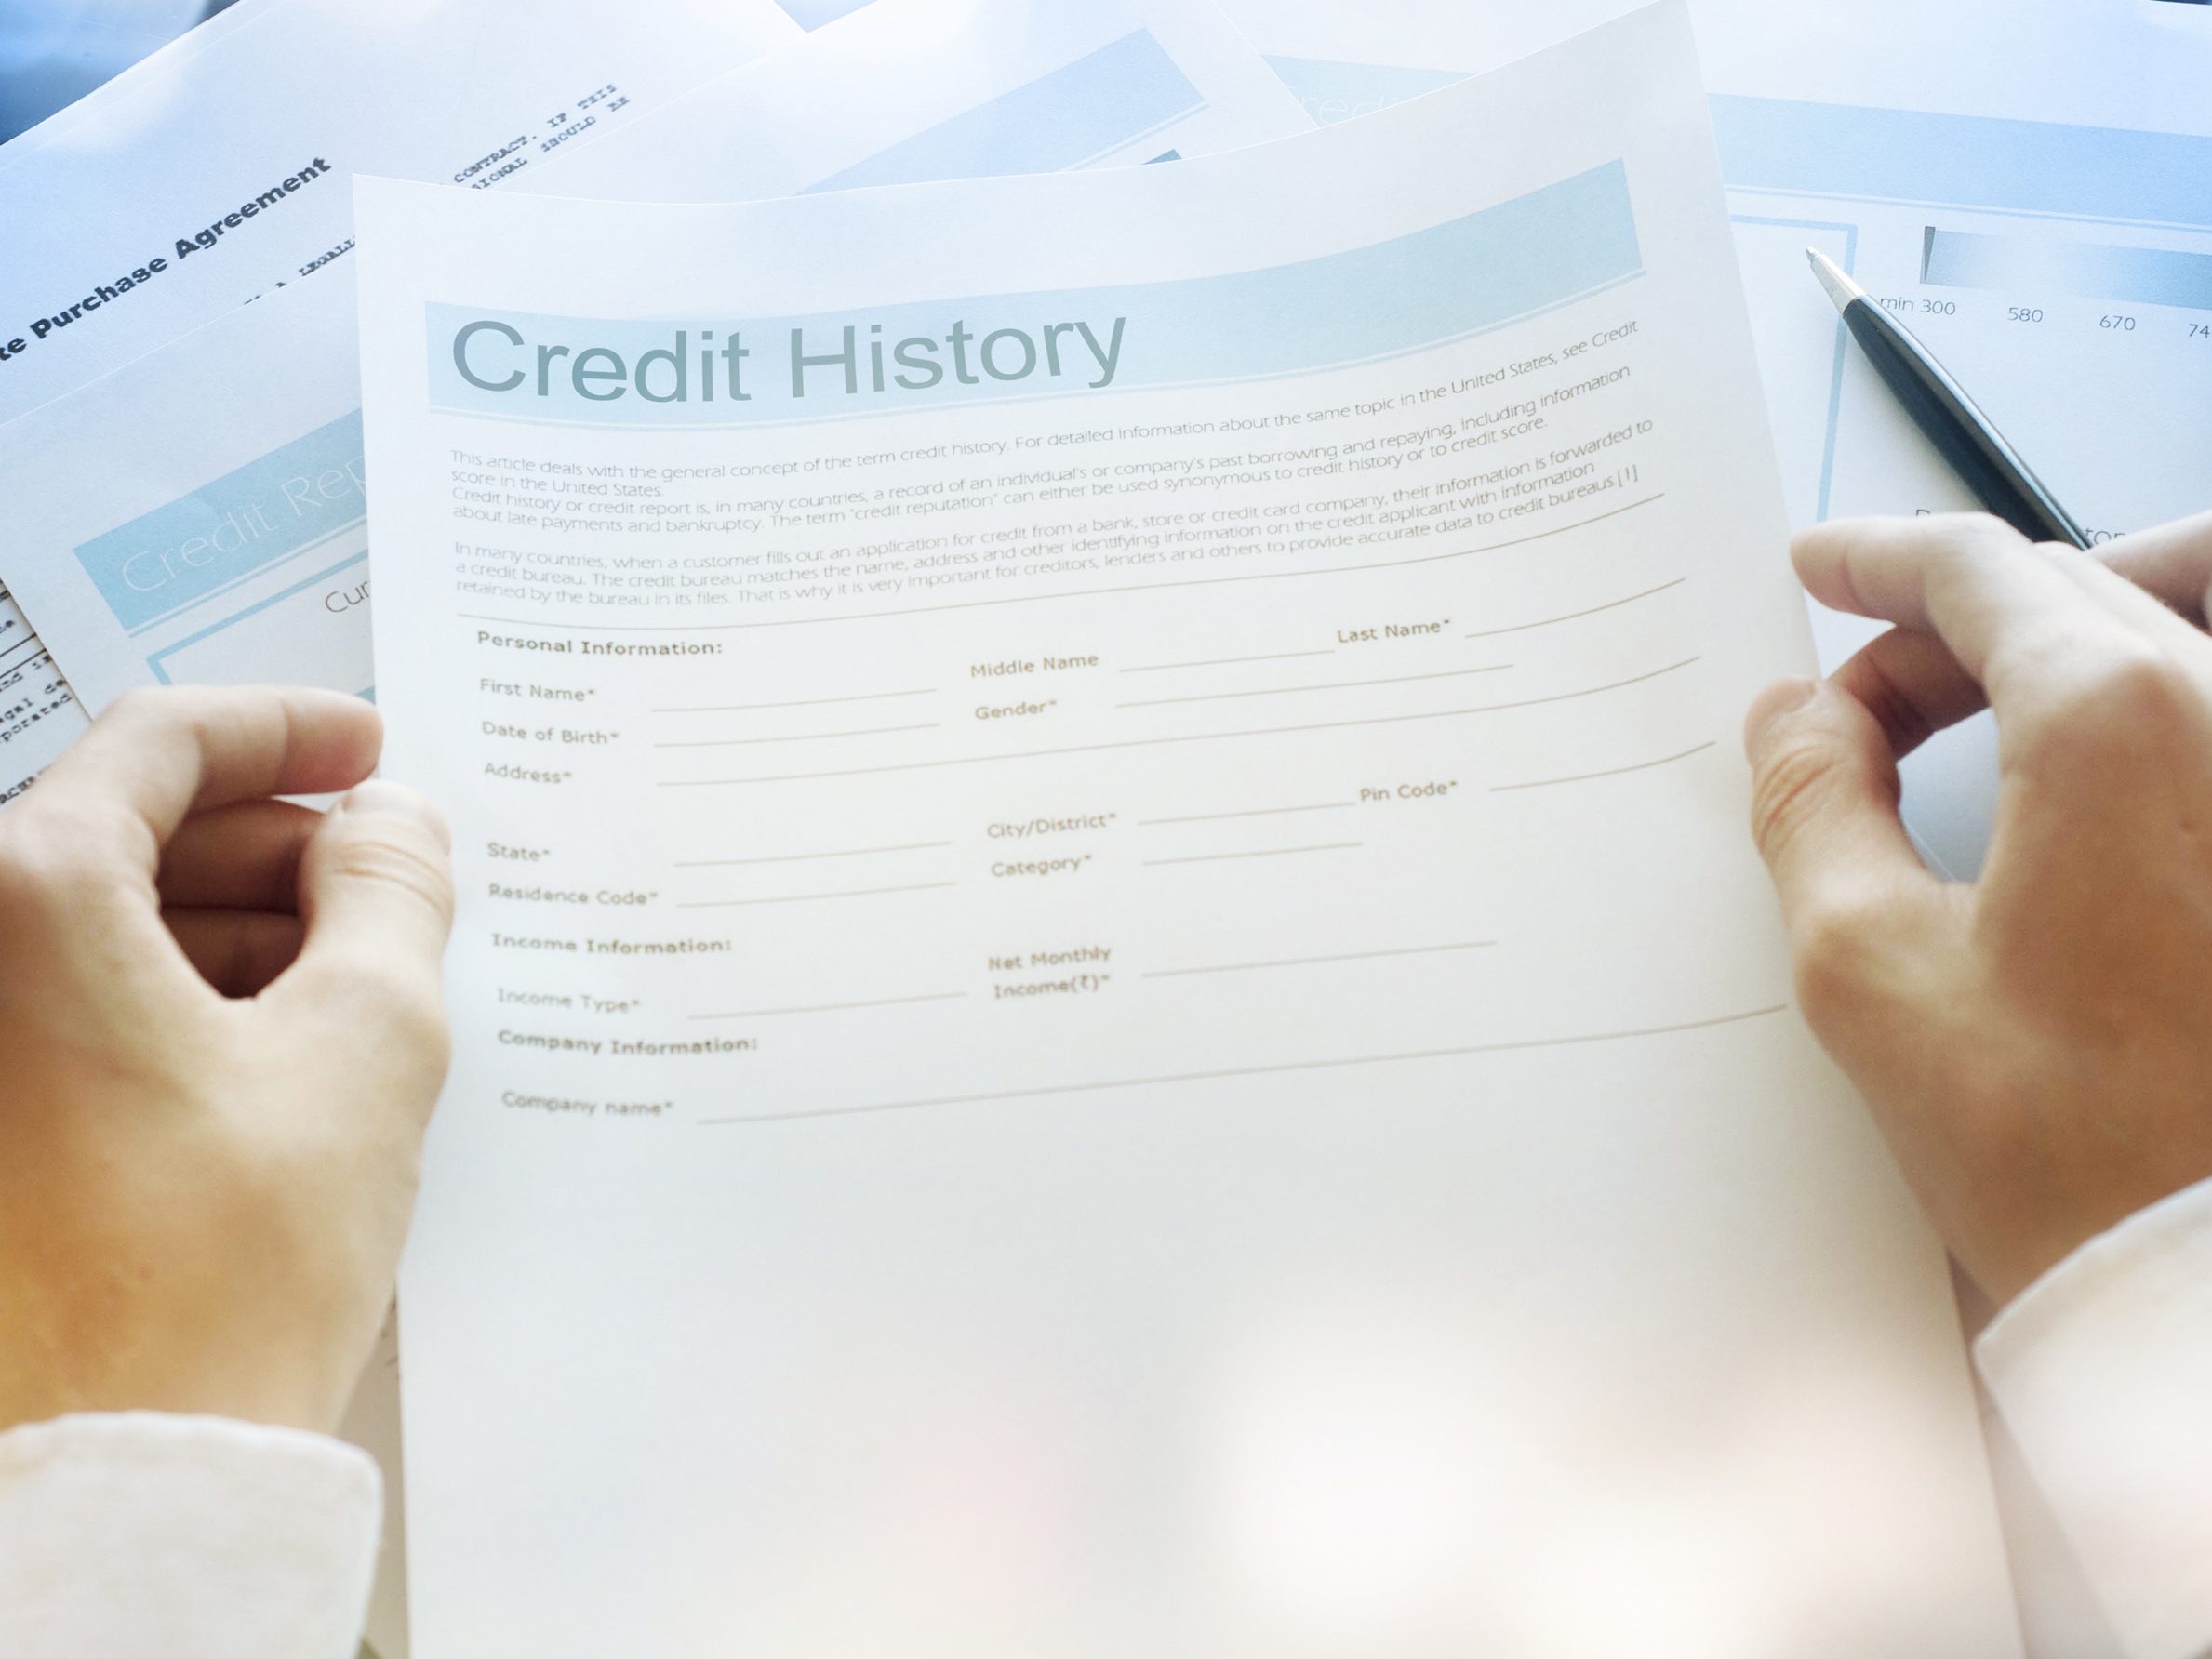 2. Know Your Credit Score